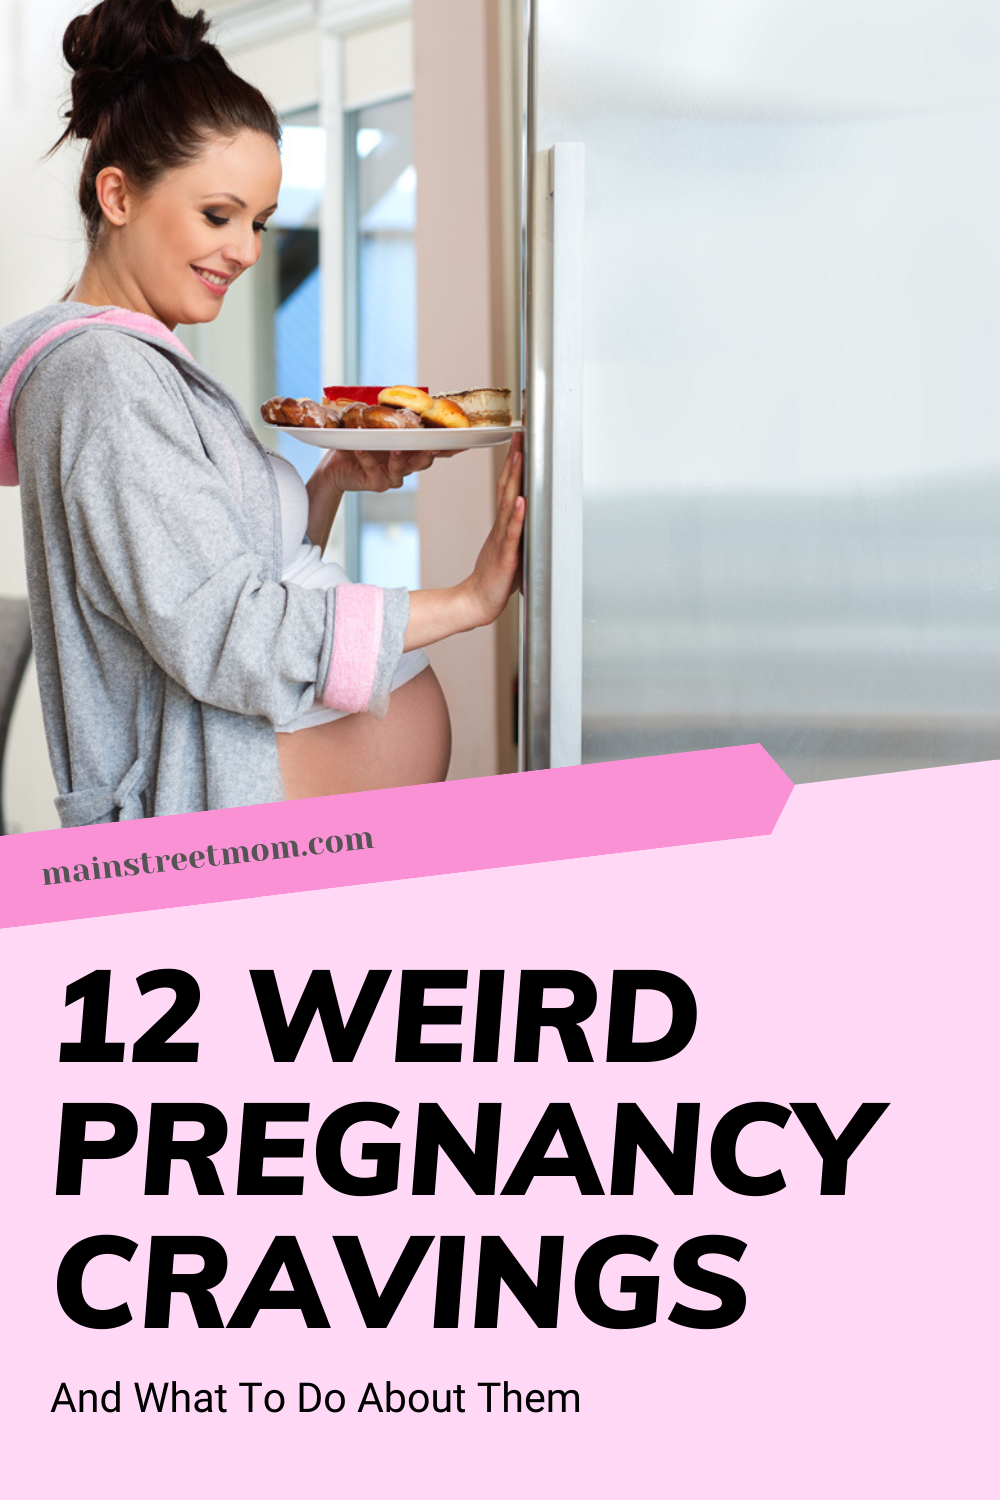 12 Weird Pregnancy Cravings And What To Do About Them